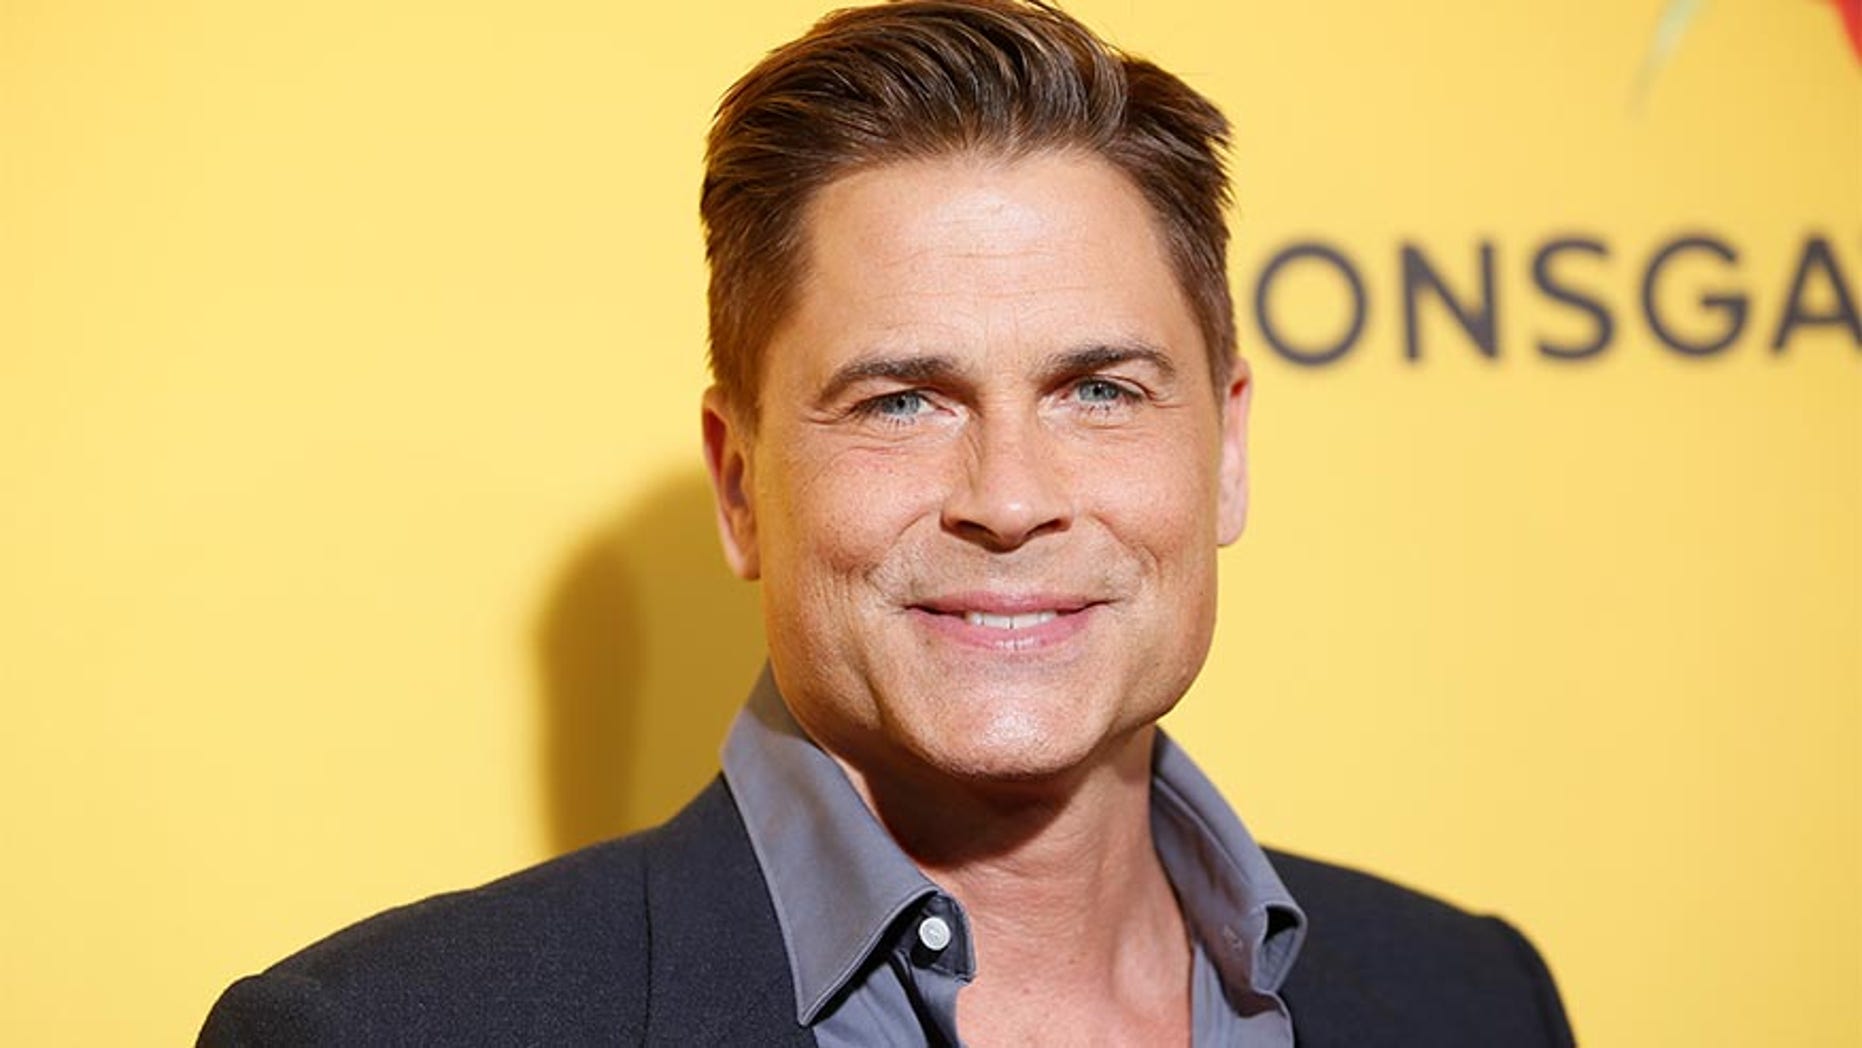   Rob Lowe's tweet about Senator Elizabeth Warren has not been well received by some in Hollywood. (Reuters) 